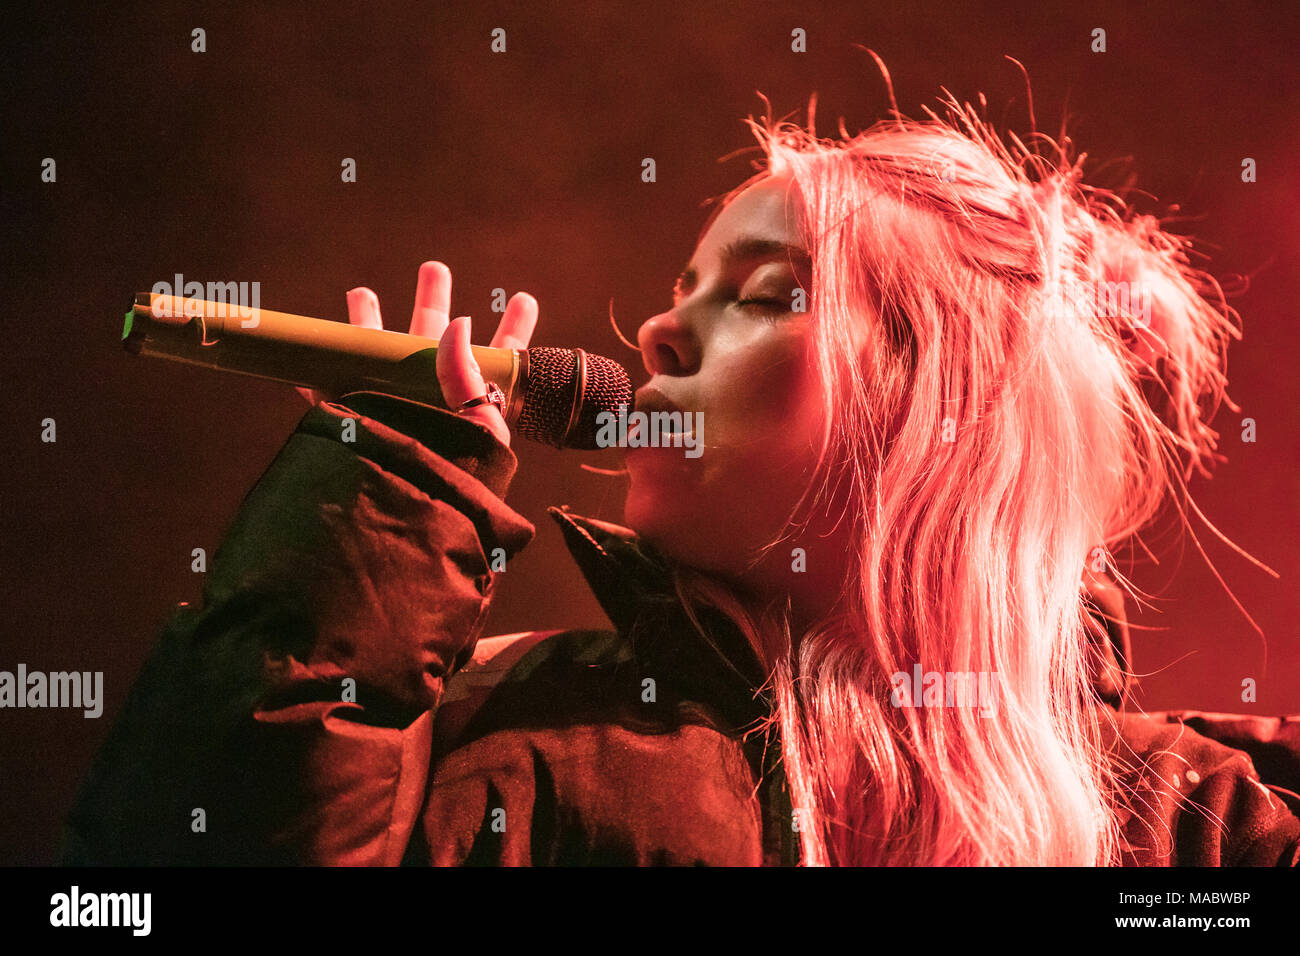 Norway, Oslo - March 1, 2018. The American singer and songwriter Billie Eilish performs a live concert at Sentrum Scene during the Norwegian showcase festival and music conference By Larm 2018 in Oslo. (Photo credit: Gonzales Photo - Stian S. Moller). Stock Photo